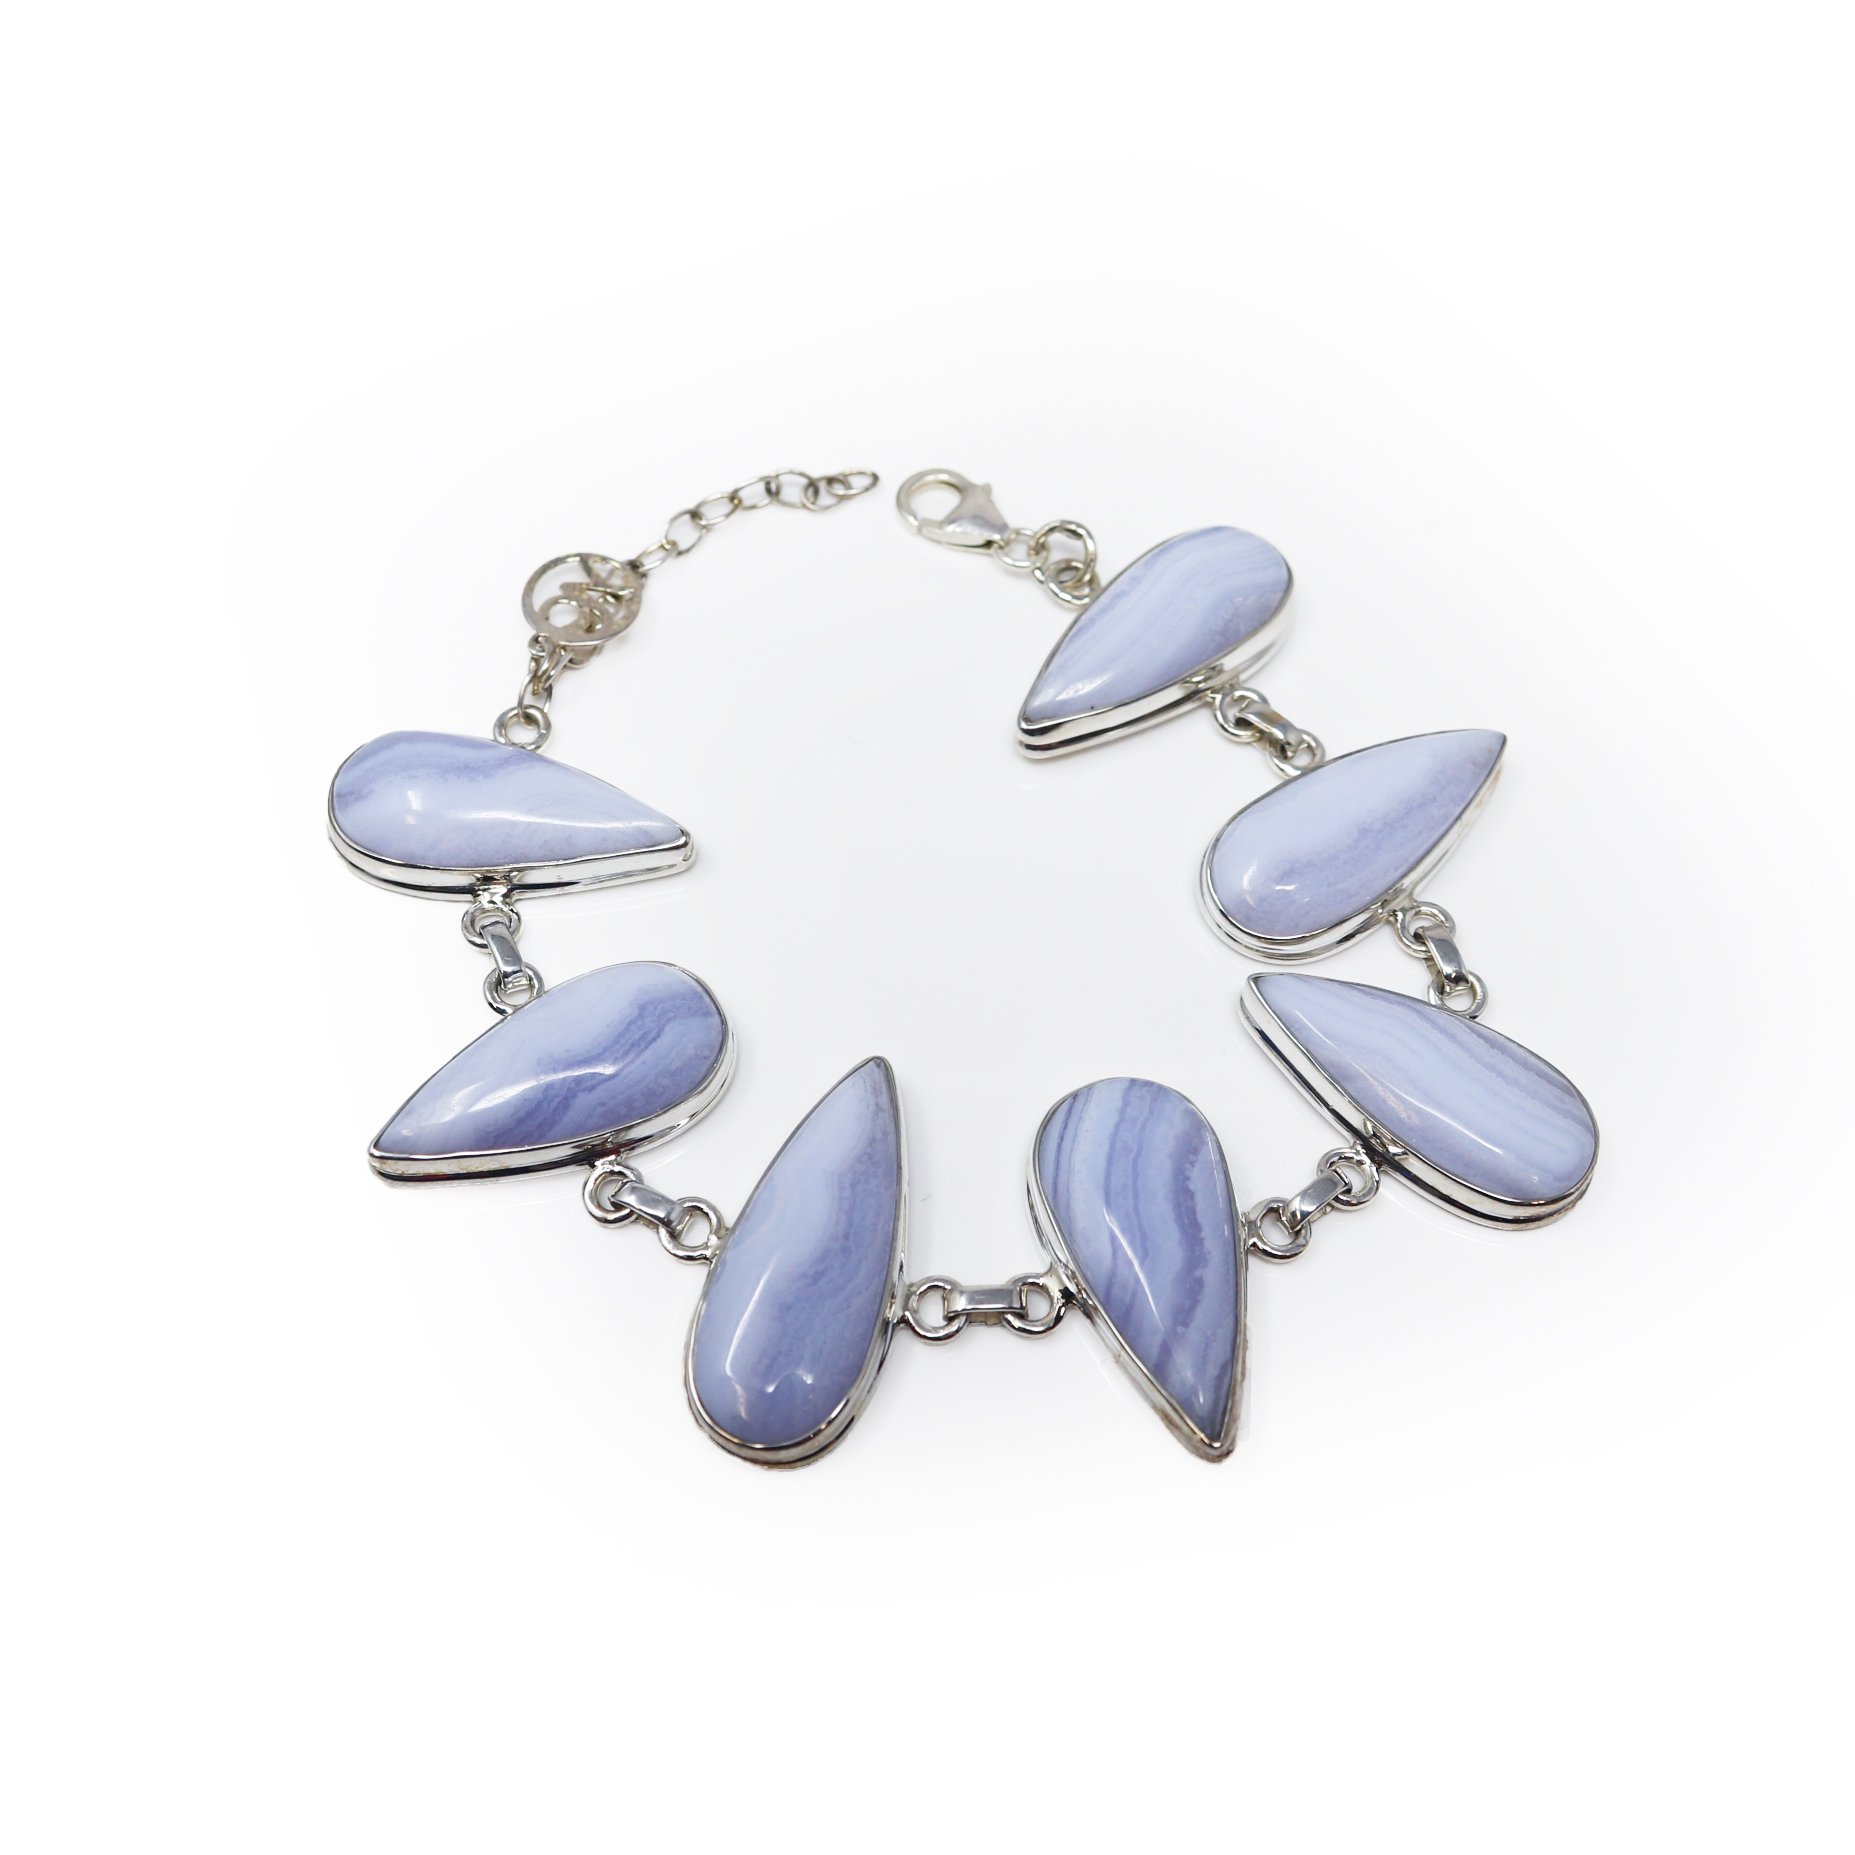 Blue Lace Link Bracelet - 7 Pear Cabochons with 925 Sterling Silver Bezel Edge